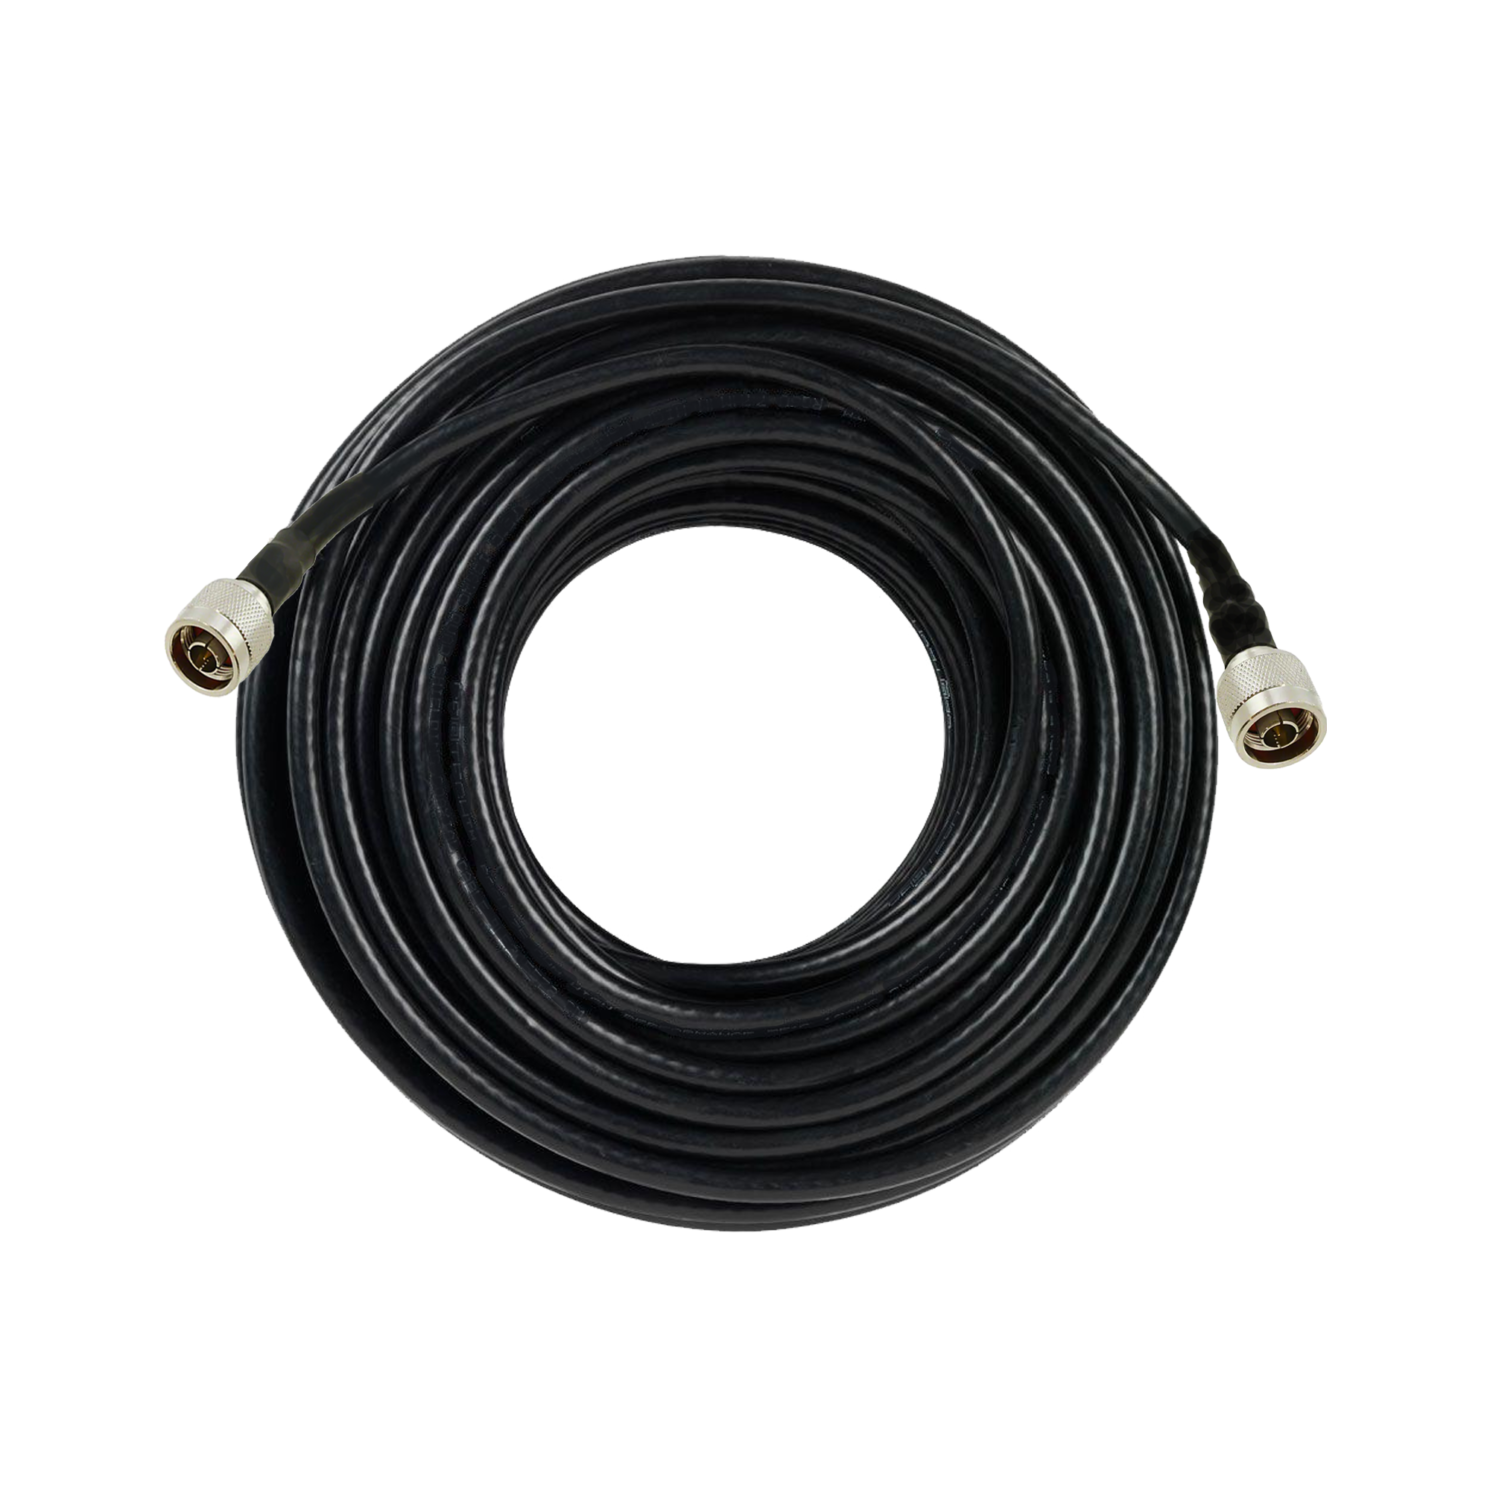 microhard cable 100ft